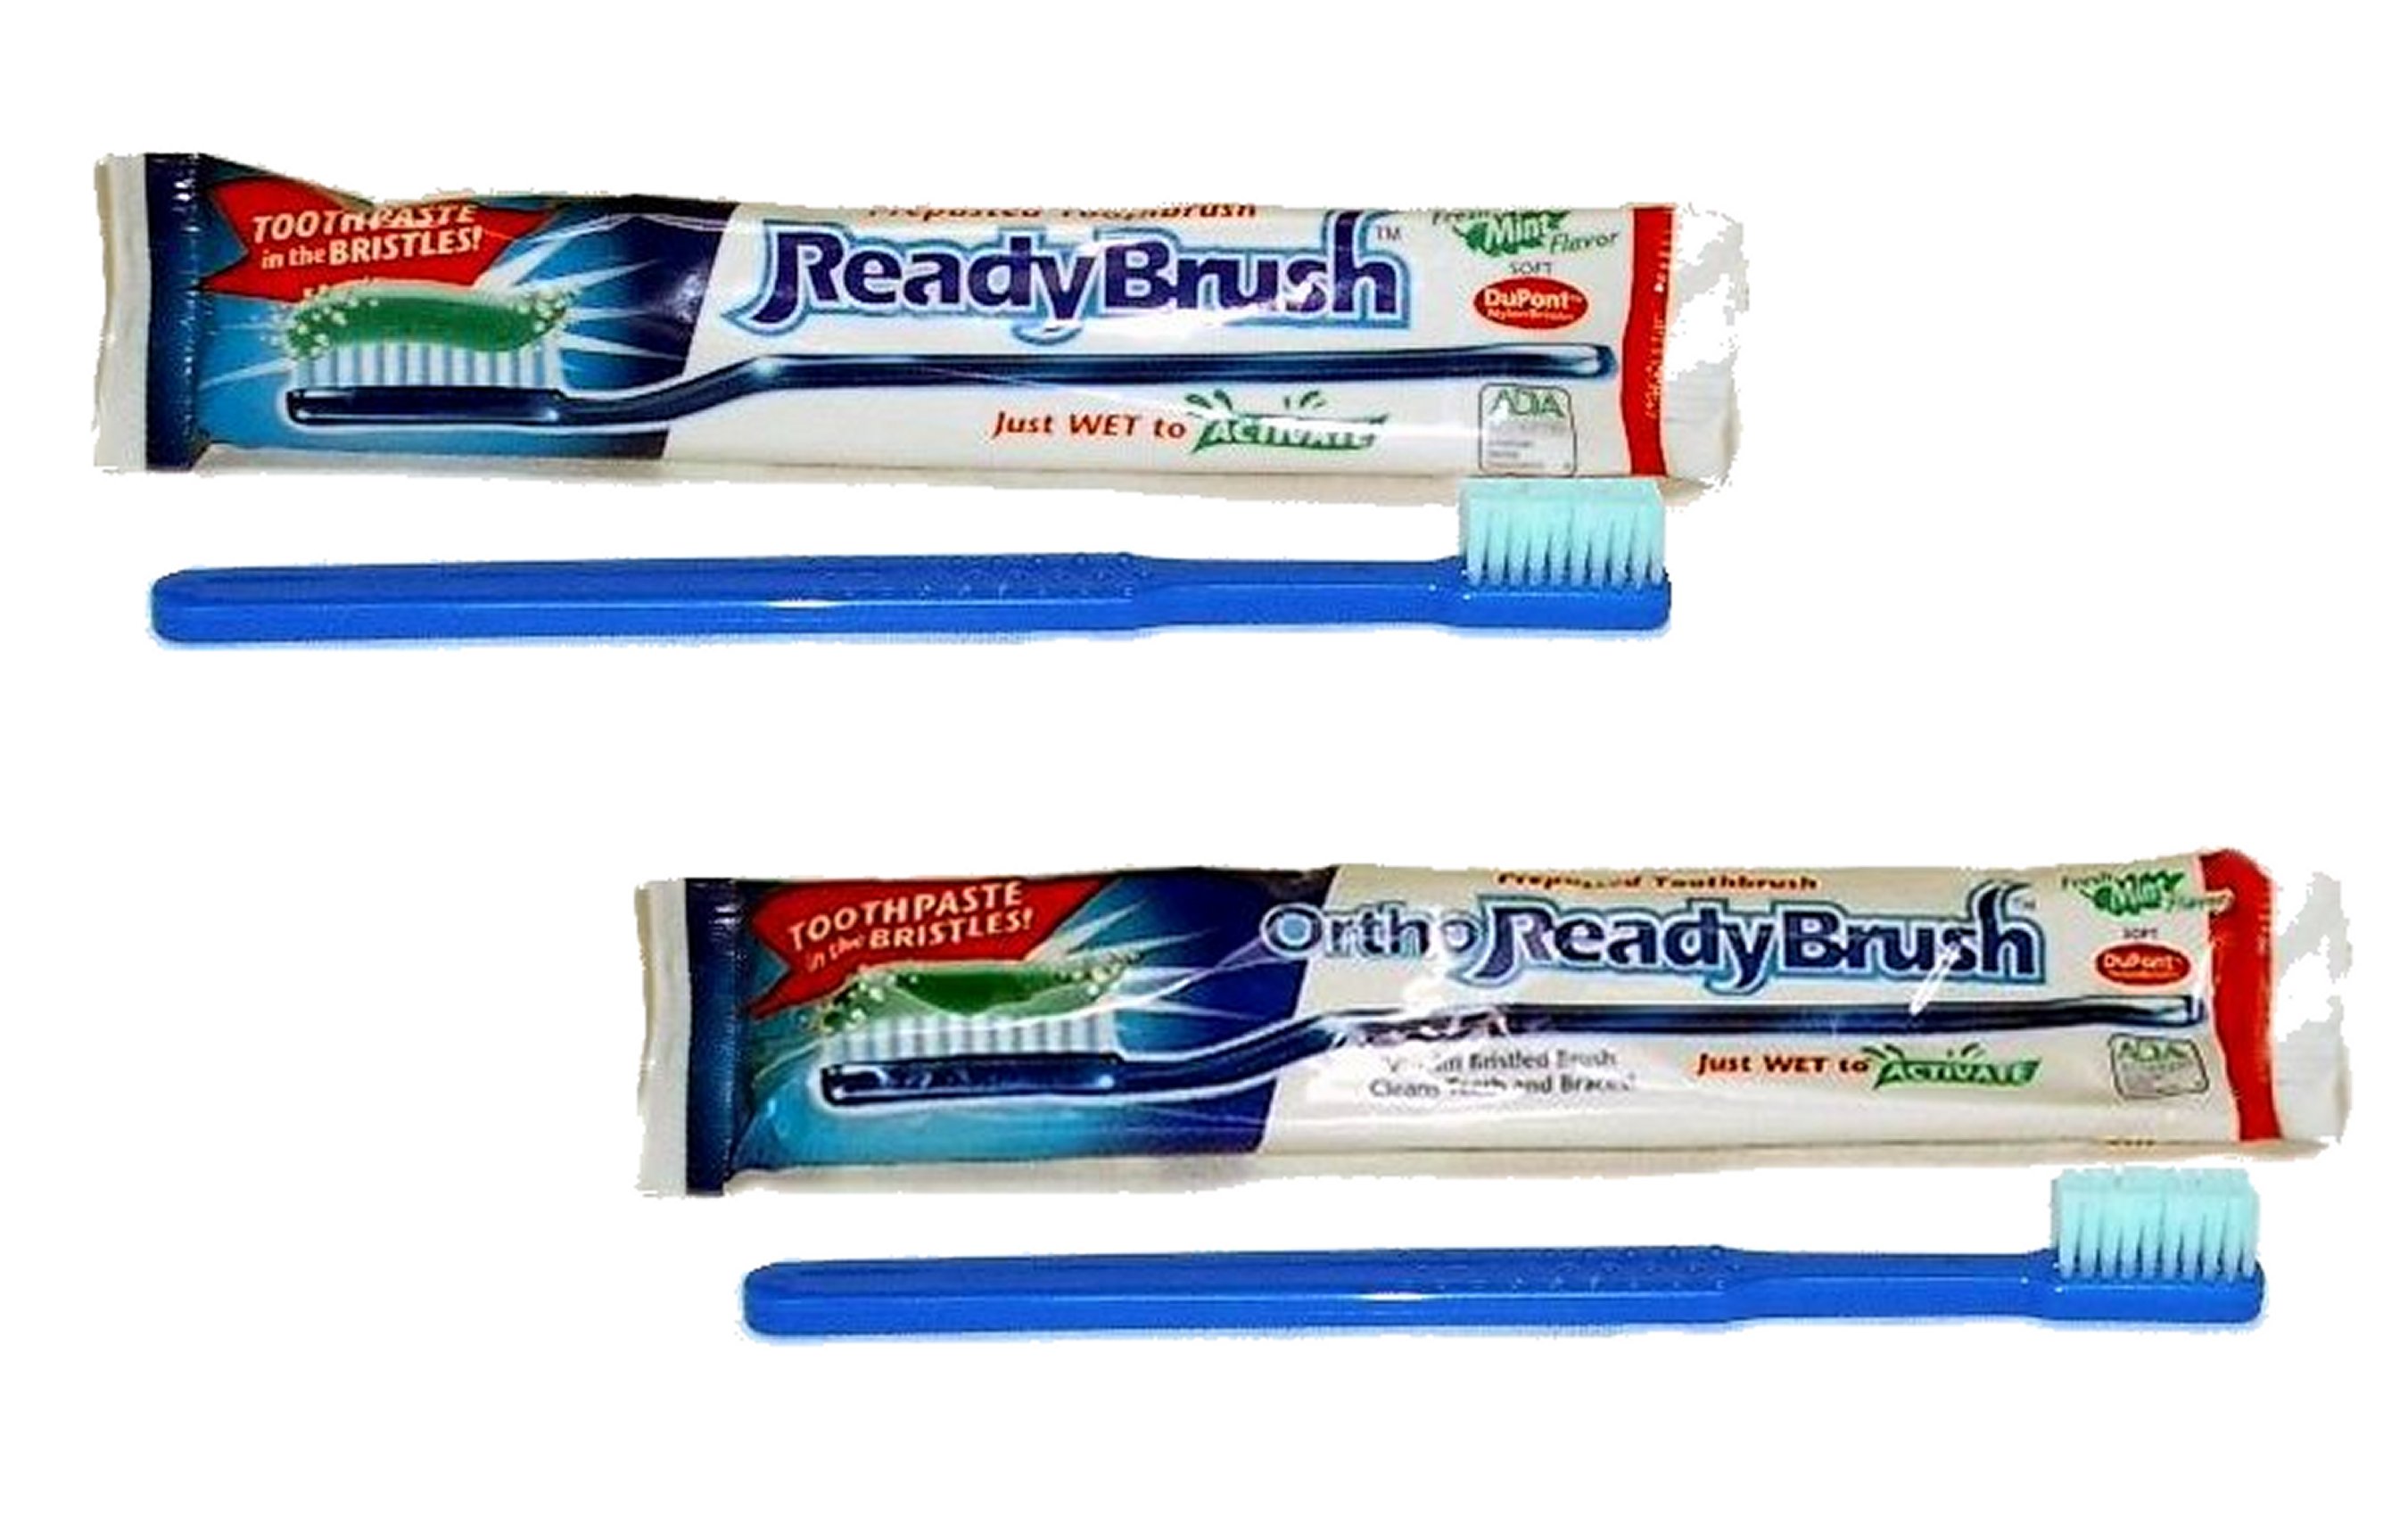 TSA Airline Ban Continues, but This Toothbrush with Built-in Toothpaste ...